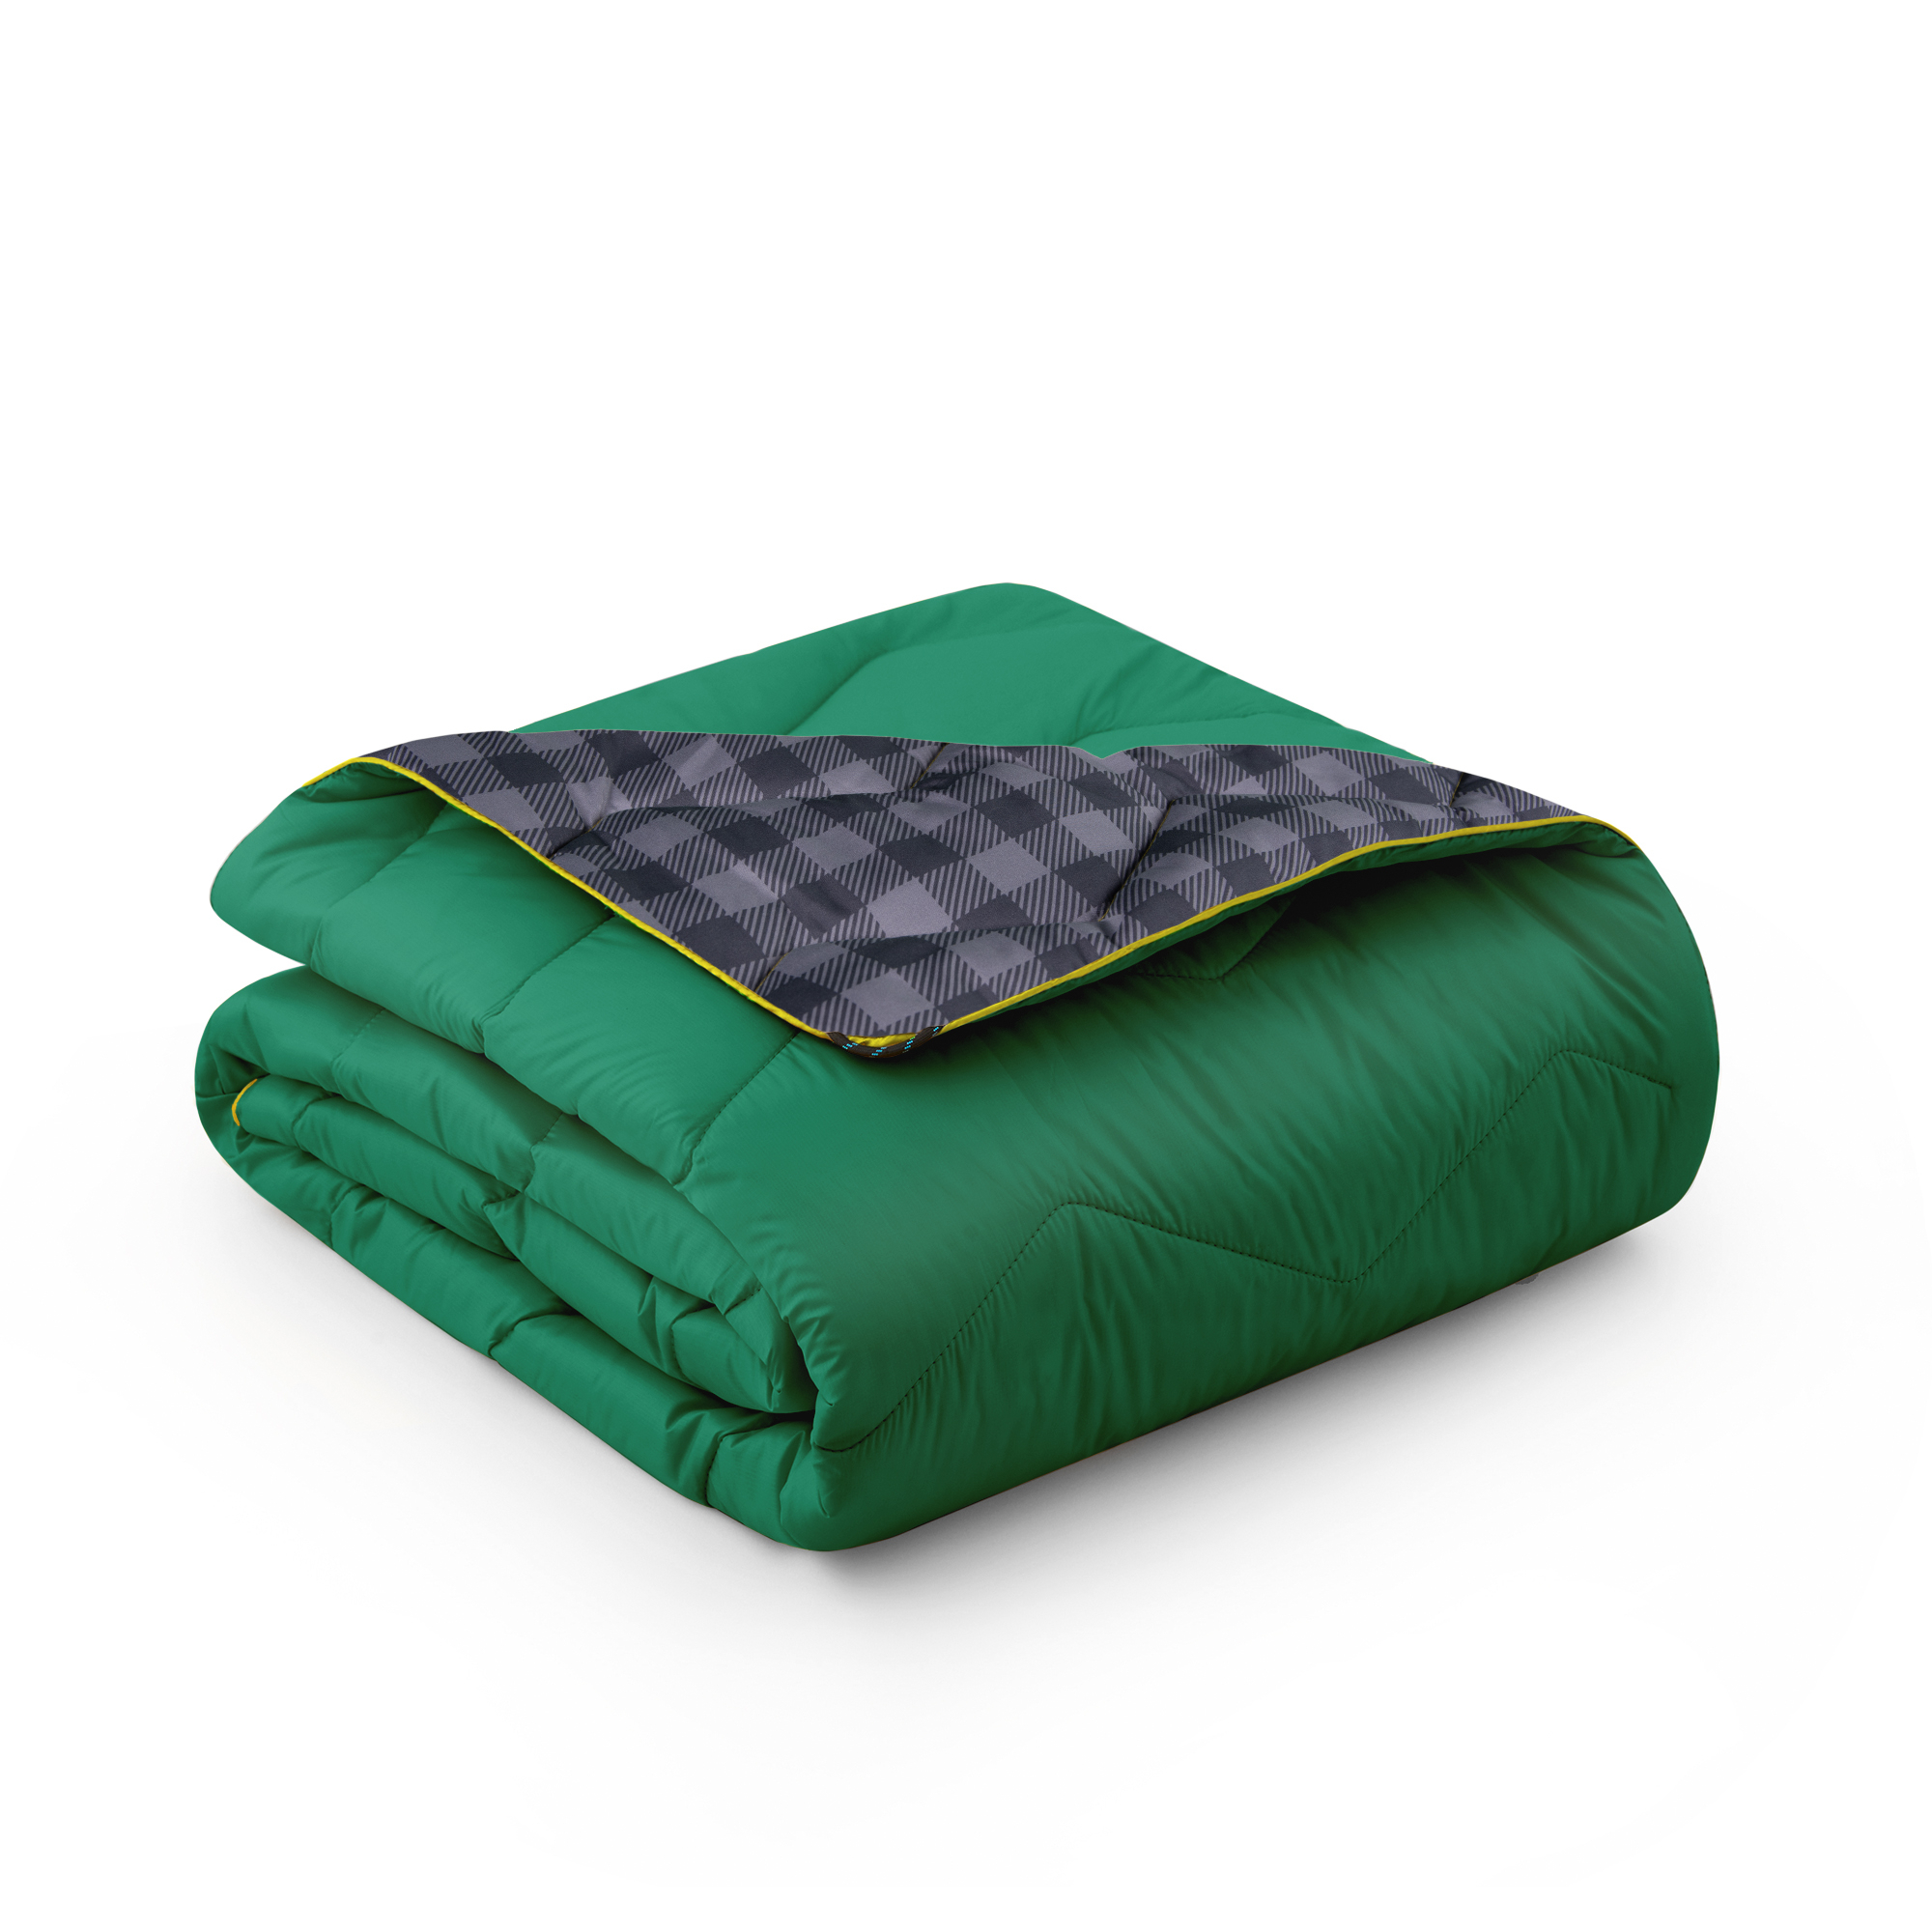 Waterproof Outdoor Blanket Packable for Camping, Hiking, Picnic and Travel - Green, King